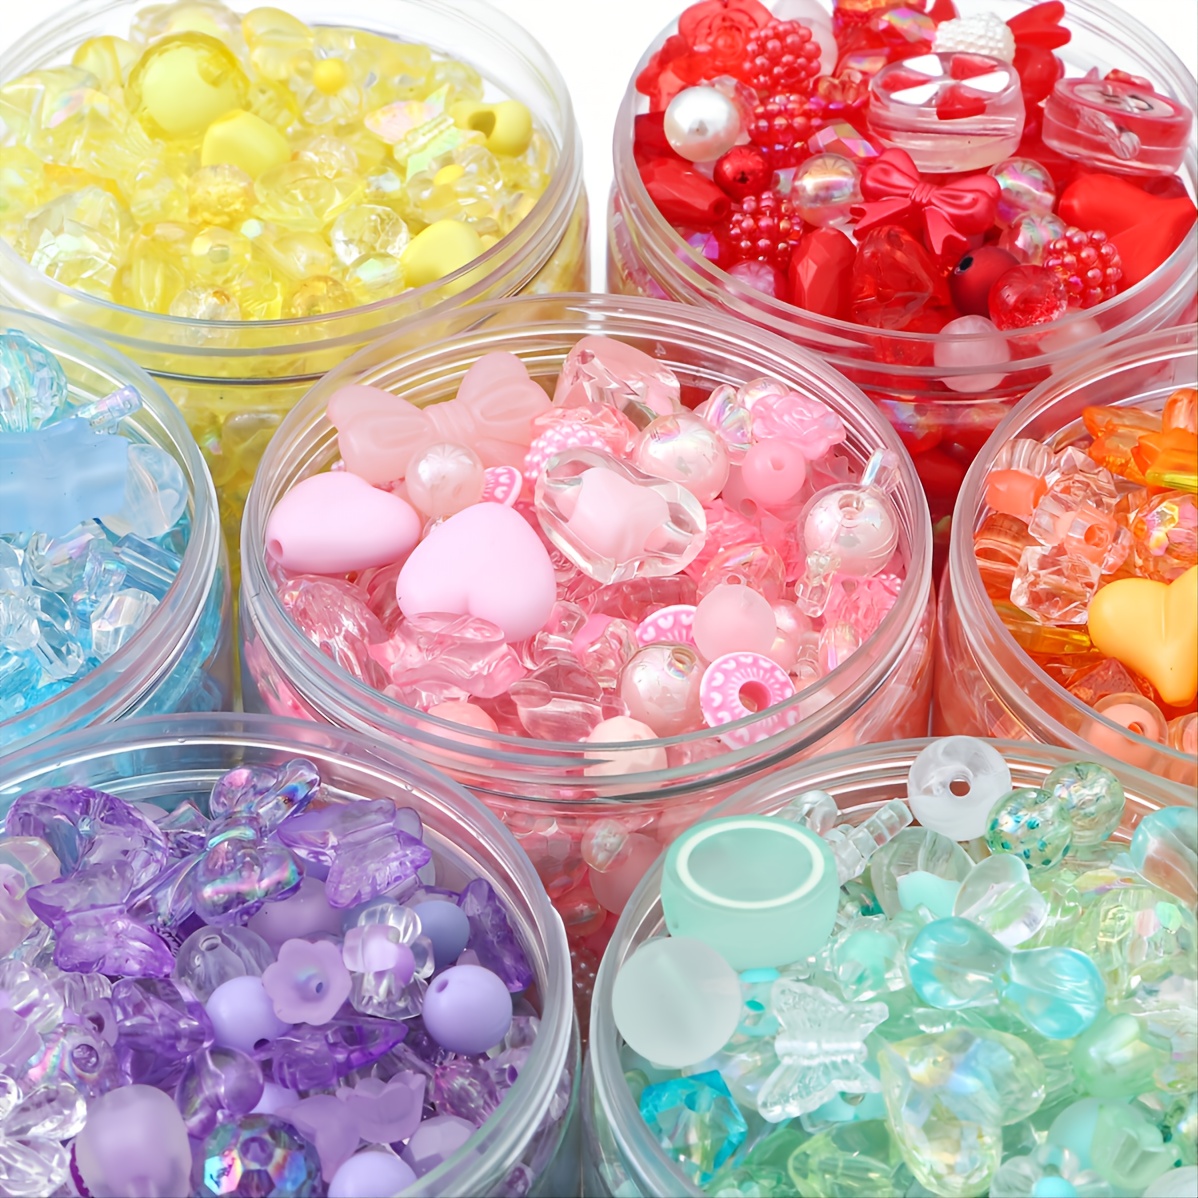 30g Random Mixed Color Milky Stone Resin Beads For Diy Jewelry Making